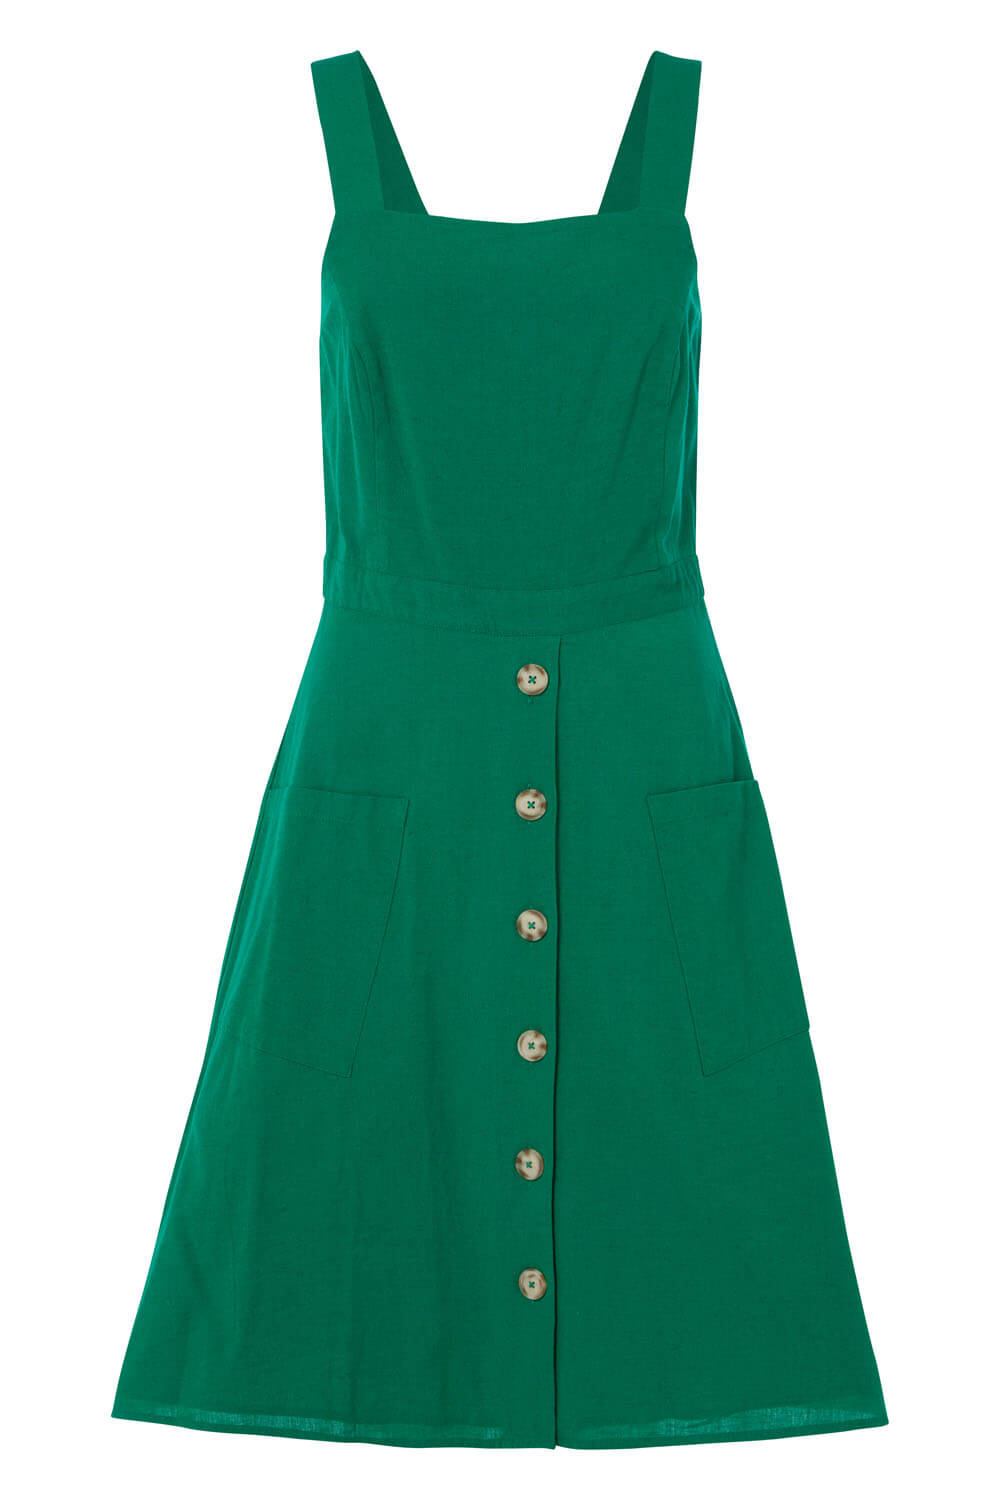 Green Fit and Flare Button Dress, Image 5 of 5